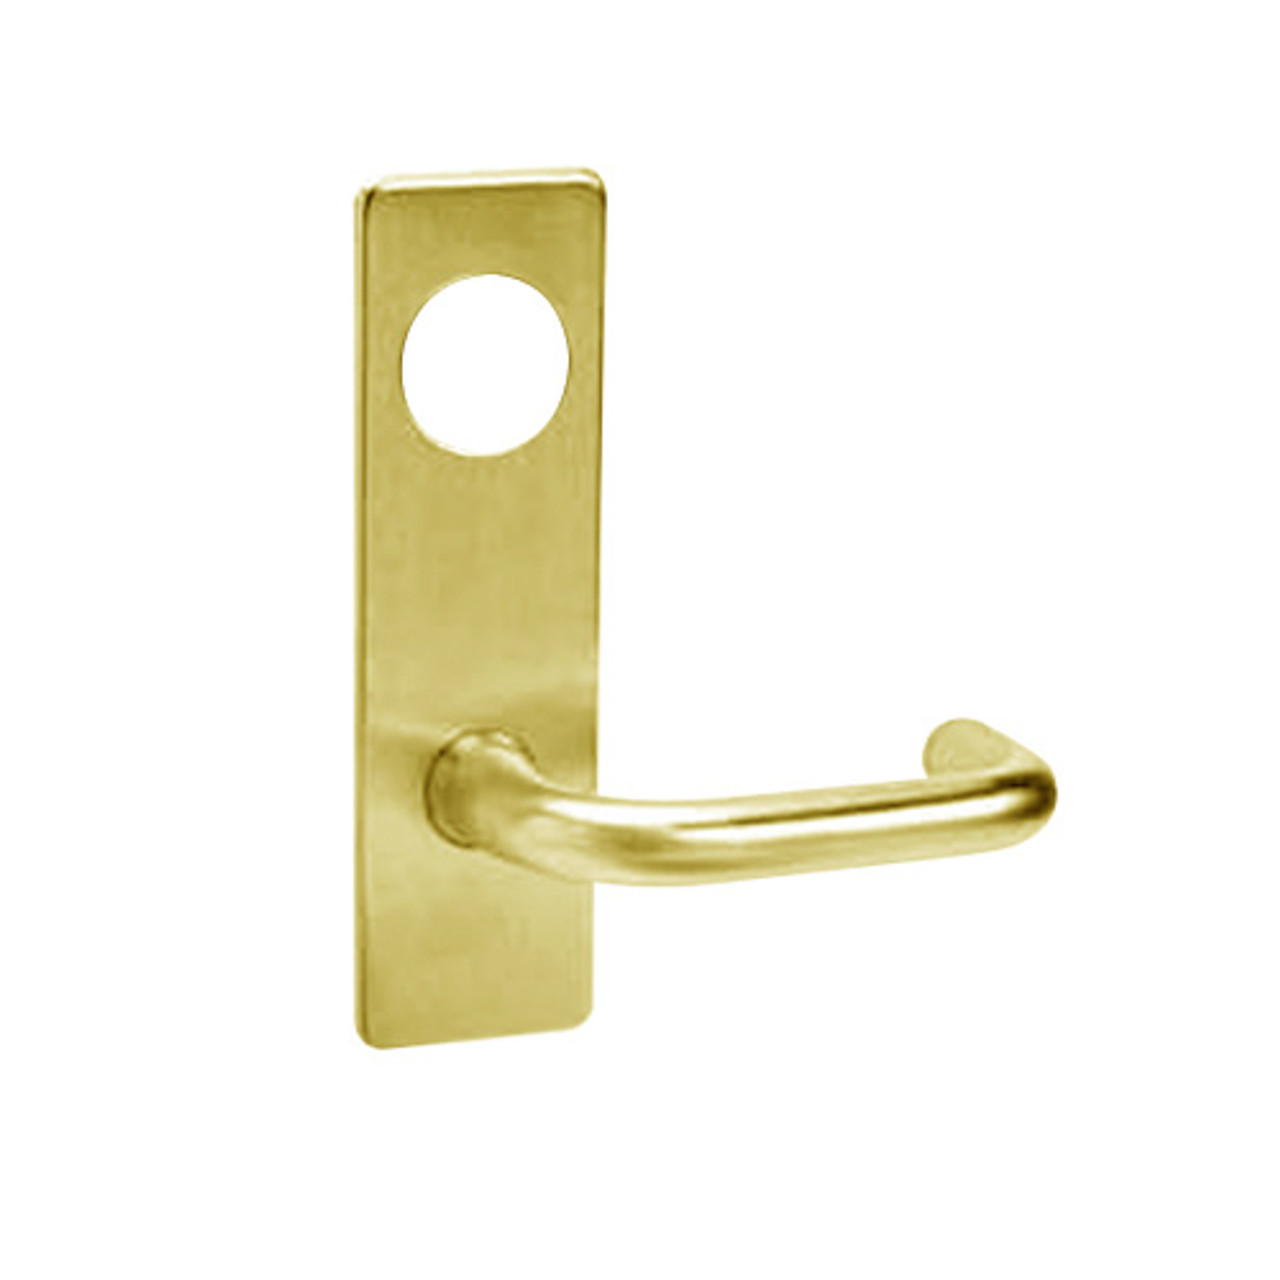 ML2024-LSR-605-LC Corbin Russwin ML2000 Series Mortise Entrance Locksets with Lustra Lever in Bright Brass